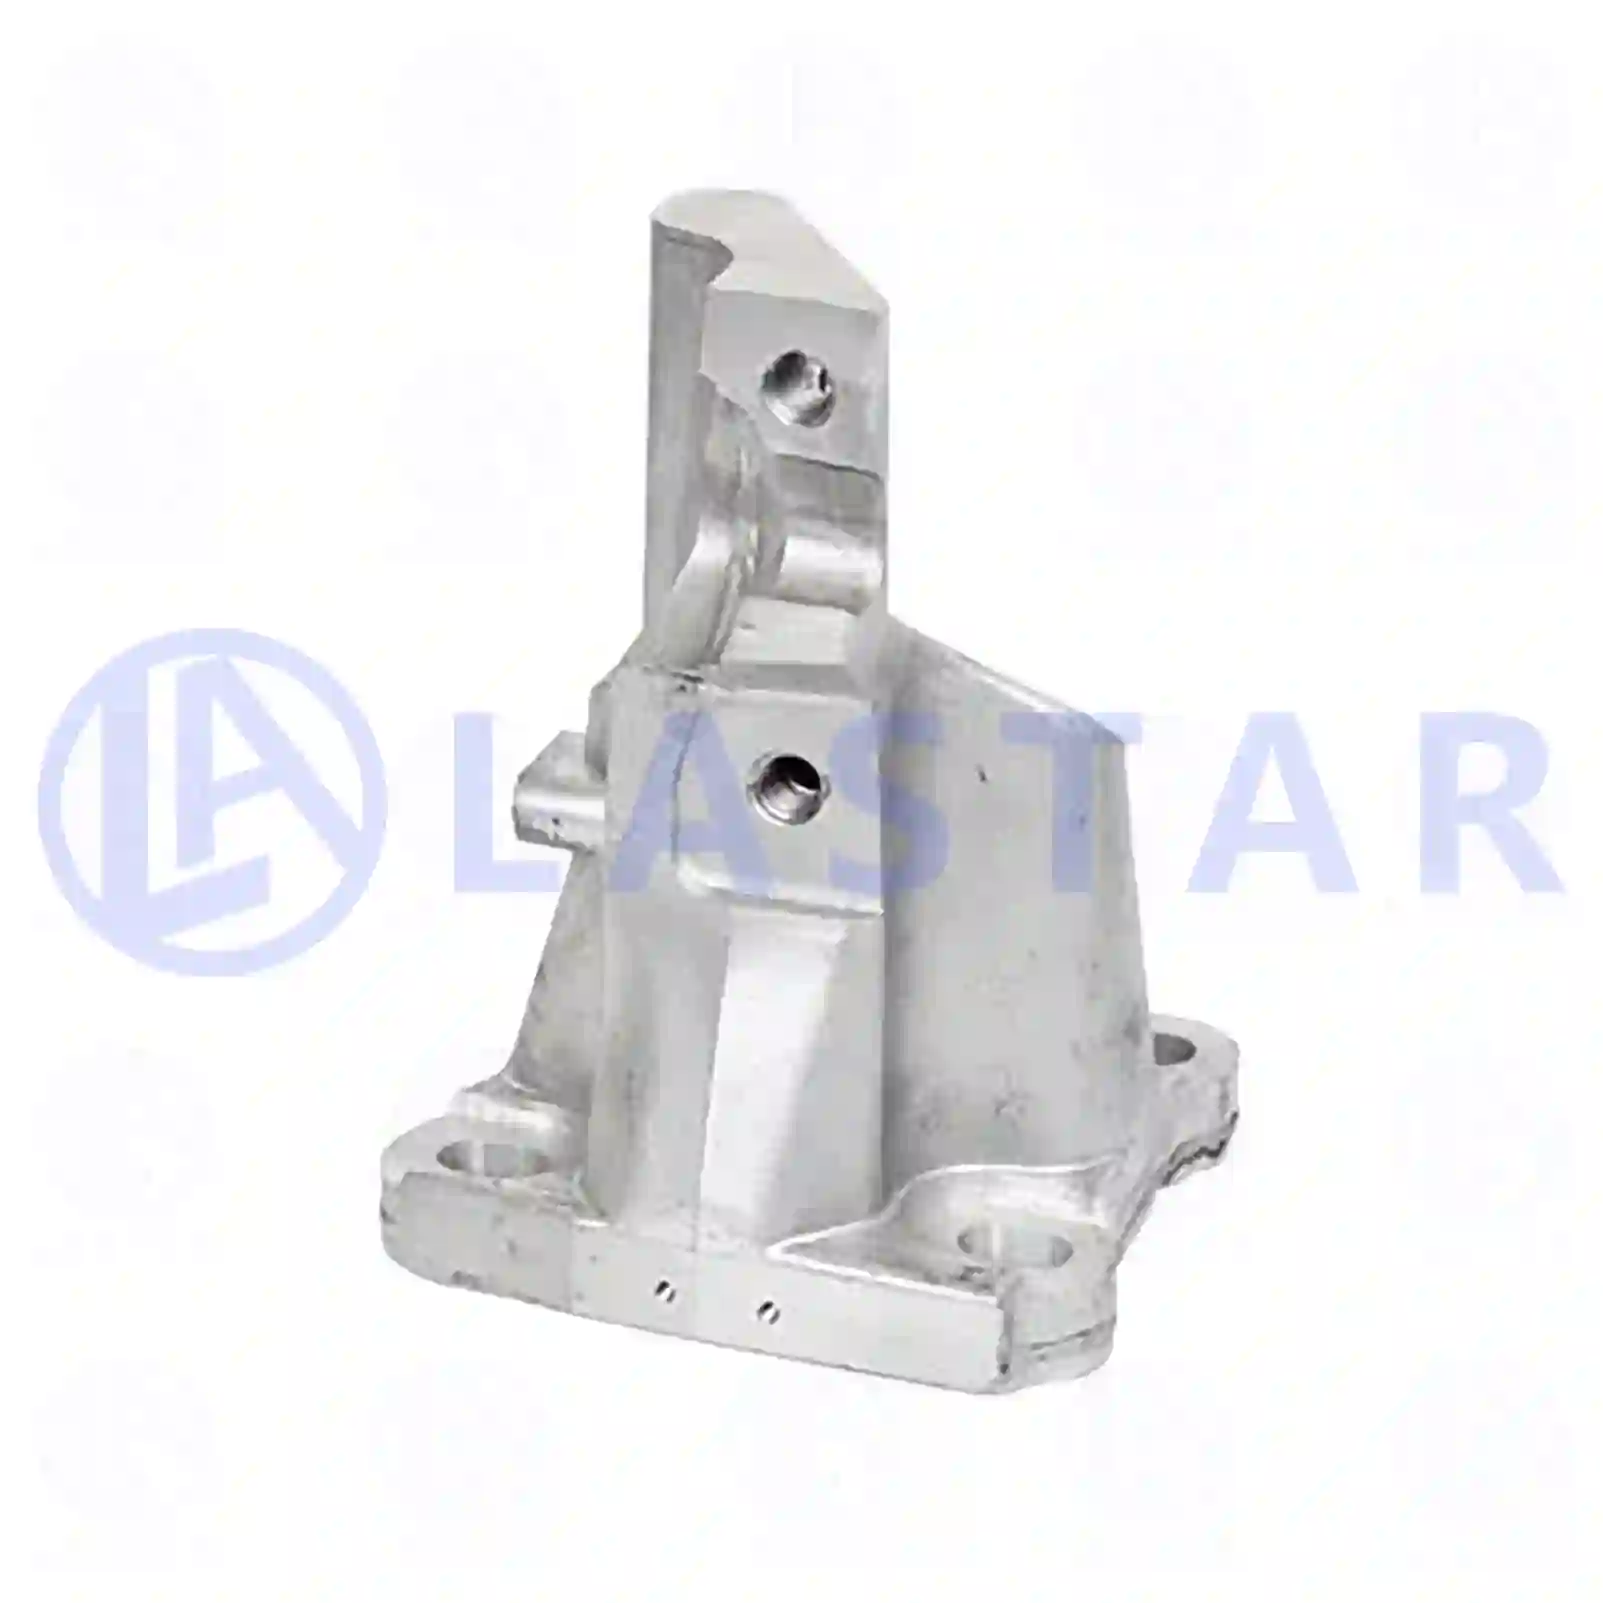 Bearing bracket, cabin suspension, right, 77736039, 1865514, 1927789, 2405514 ||  77736039 Lastar Spare Part | Truck Spare Parts, Auotomotive Spare Parts Bearing bracket, cabin suspension, right, 77736039, 1865514, 1927789, 2405514 ||  77736039 Lastar Spare Part | Truck Spare Parts, Auotomotive Spare Parts